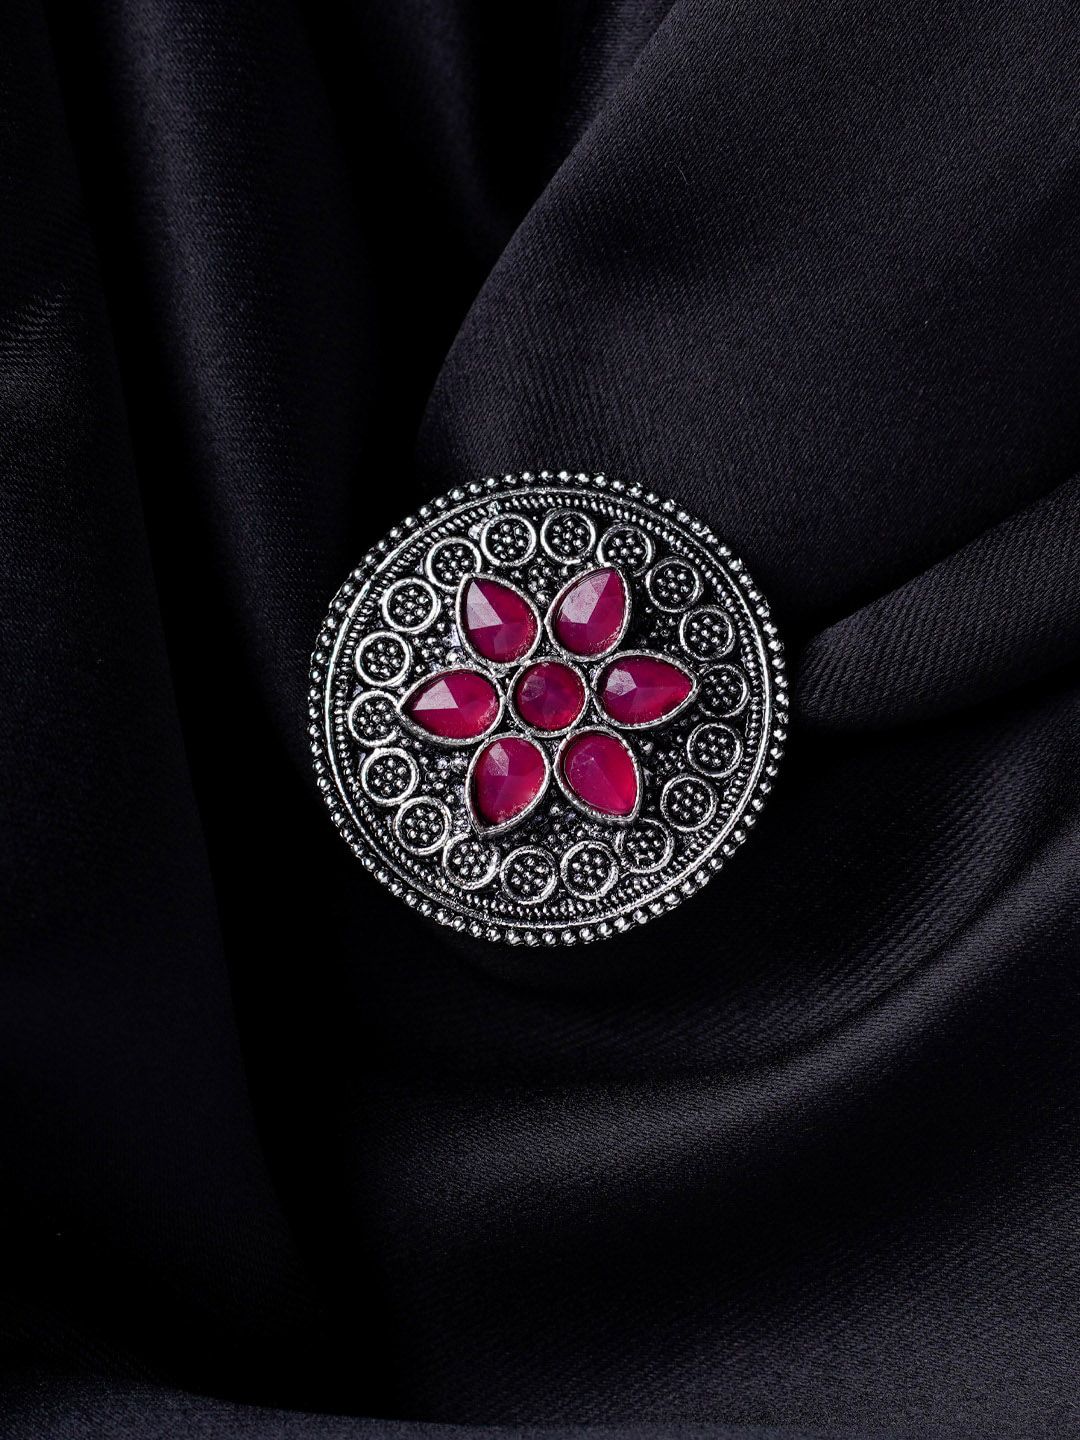 MORKANTH JEWELLERY Silver-Plated & Pink Oxidized Stone-Studded Adjustable Finger Price in India